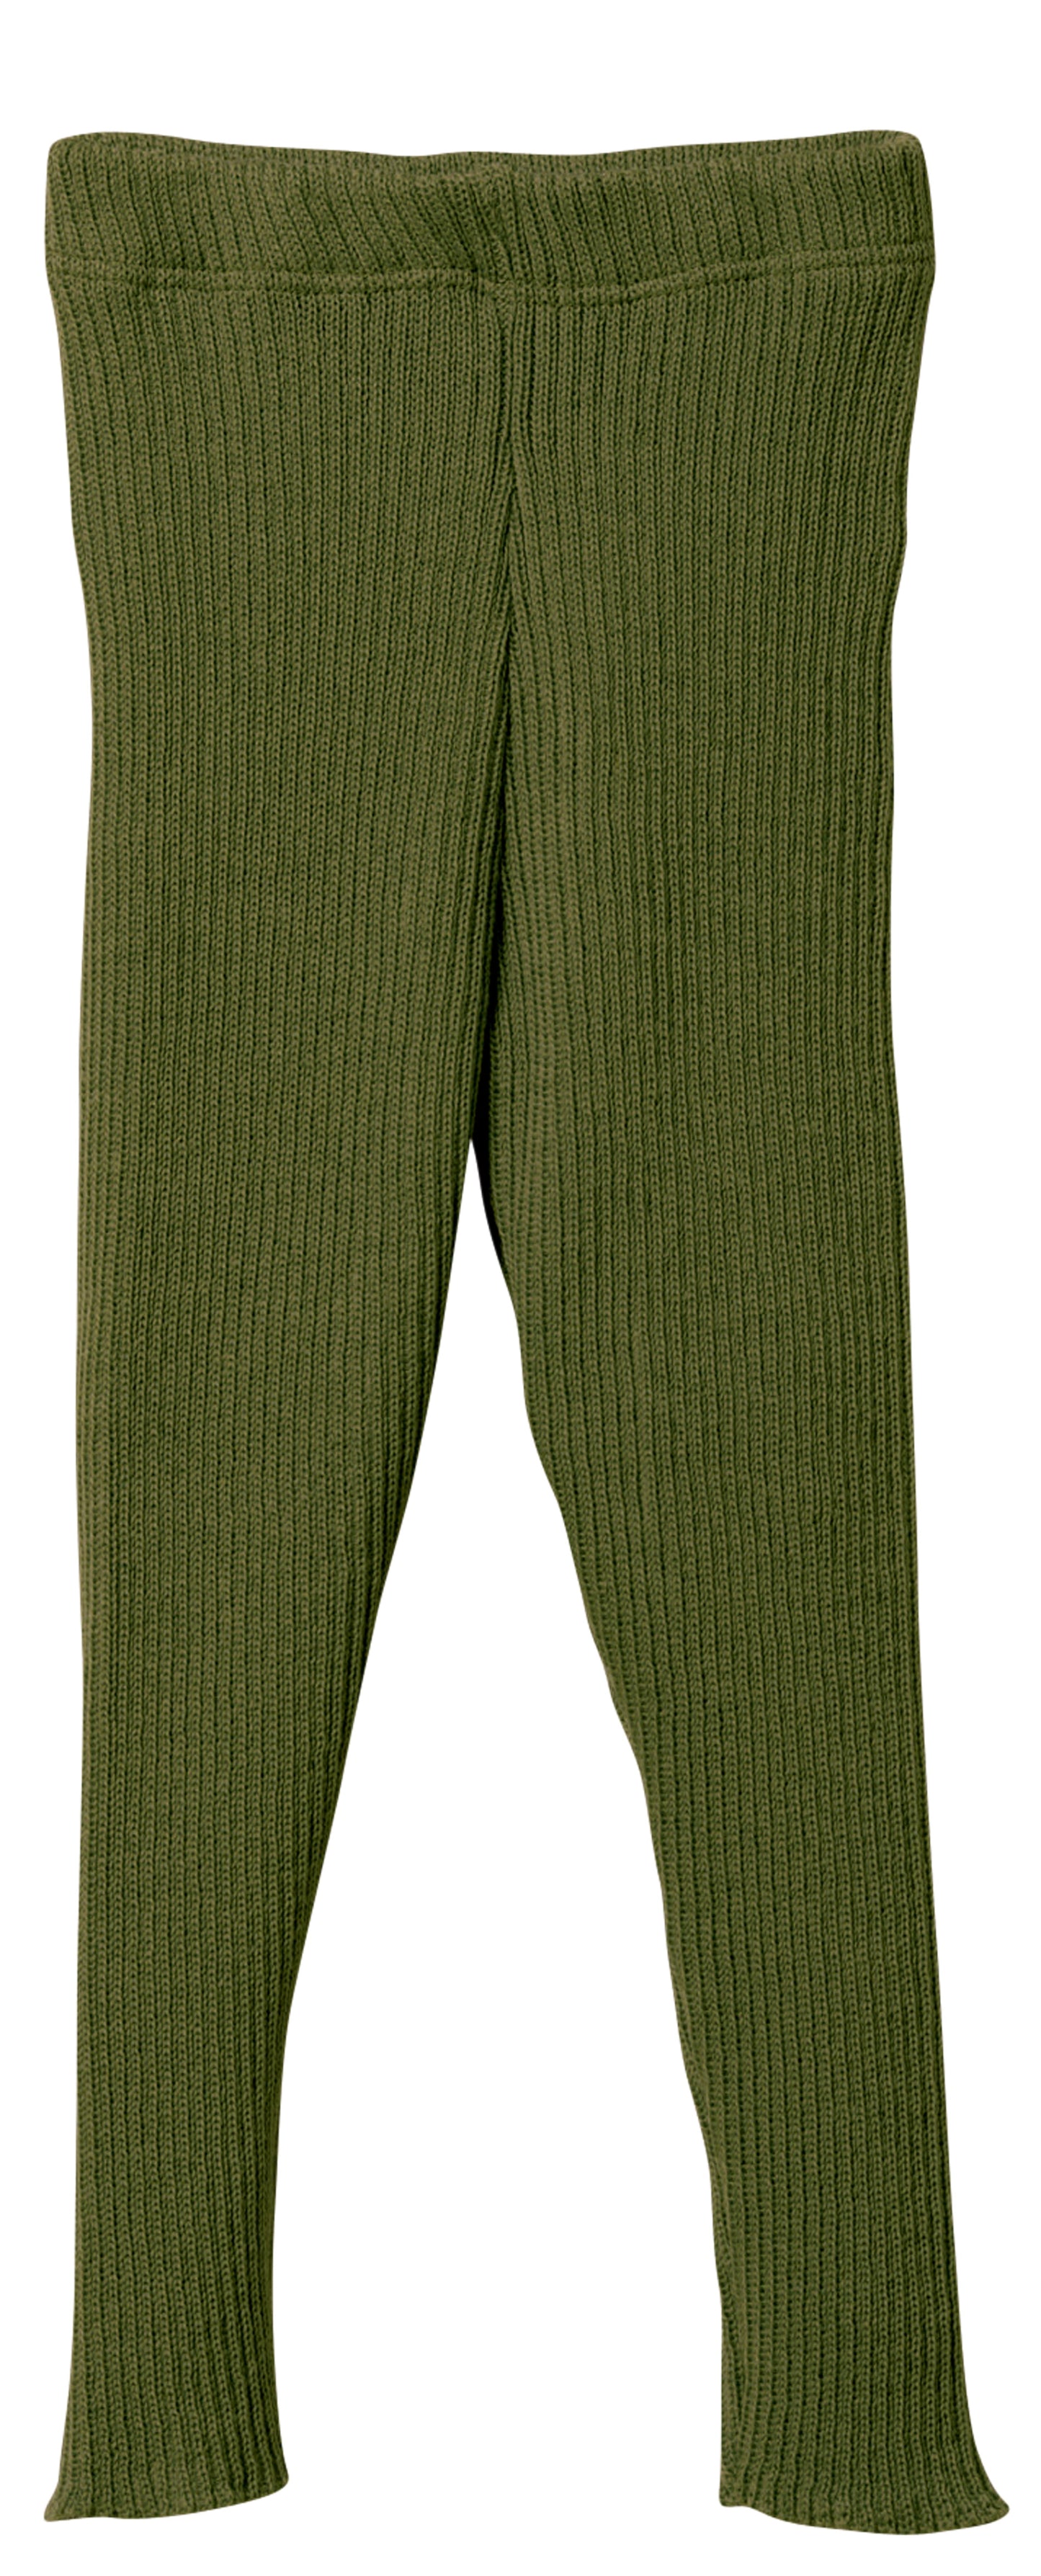 Load image into Gallery viewer, Disana Child Legging, Wool Knit
